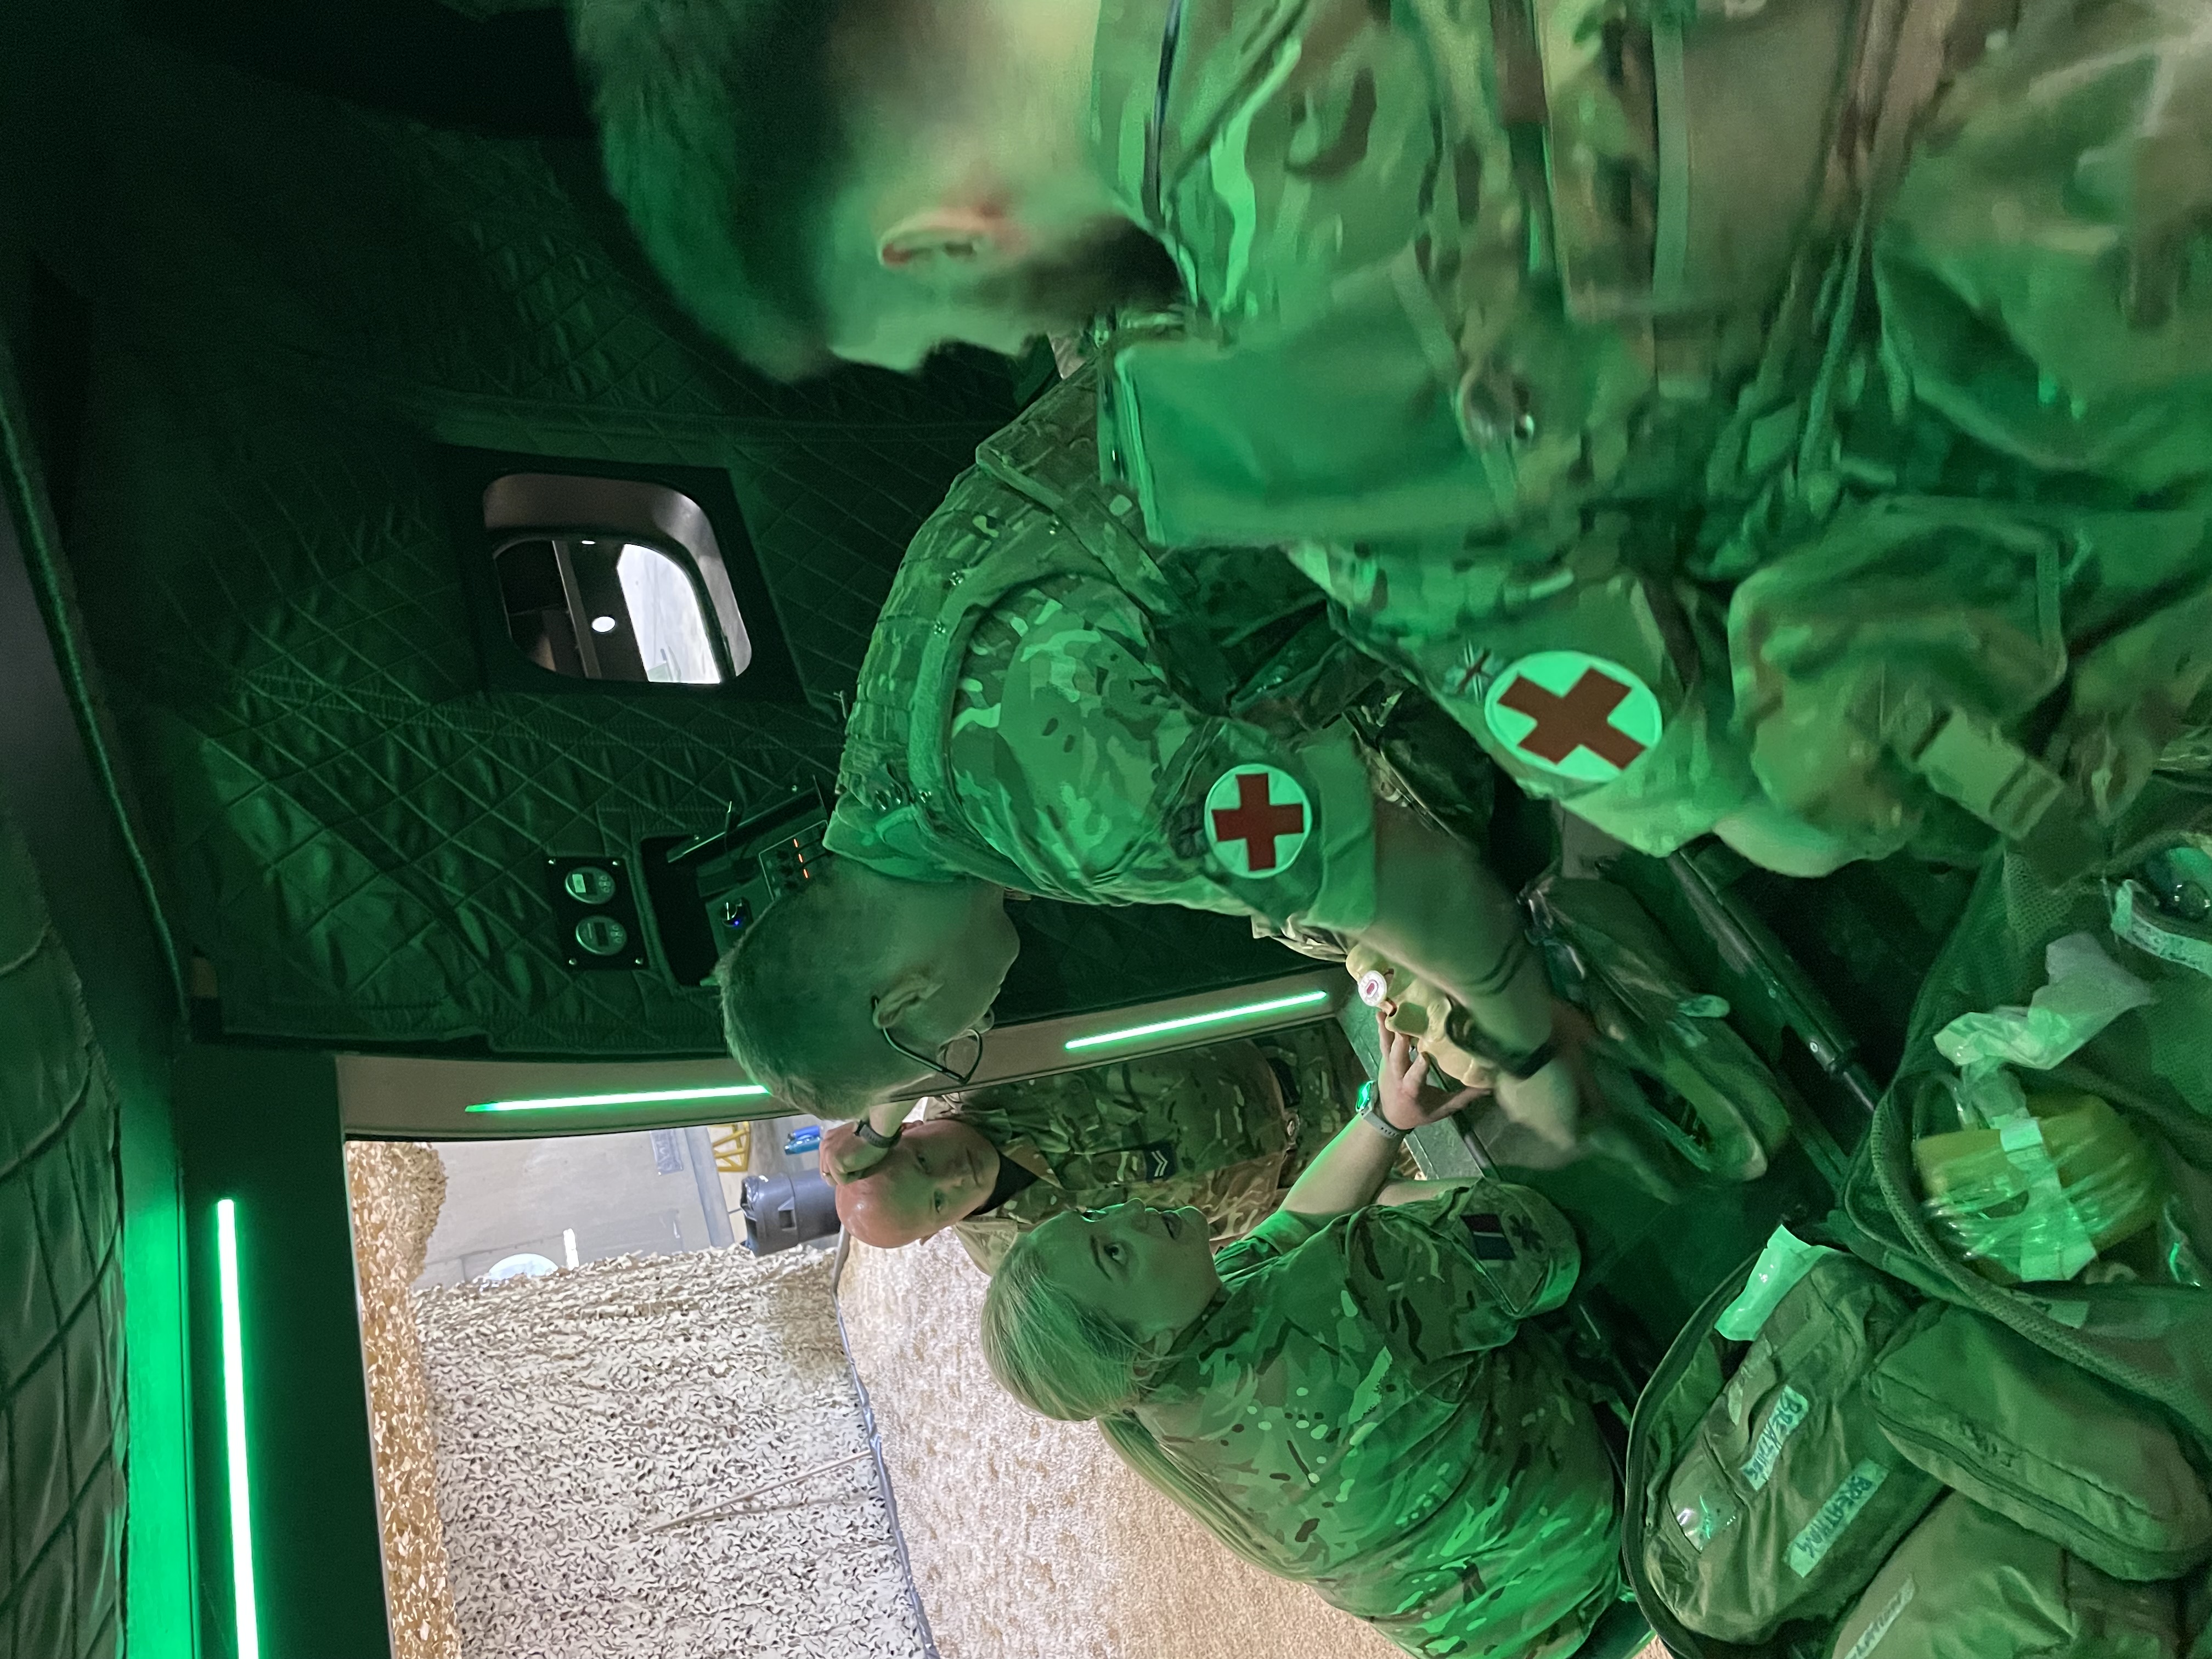 On Friday 10 May, specialist training was provided by Number 4626 Aeromedical Evacuation Squadron, focussing on Pre-Hospital Emergency Care.